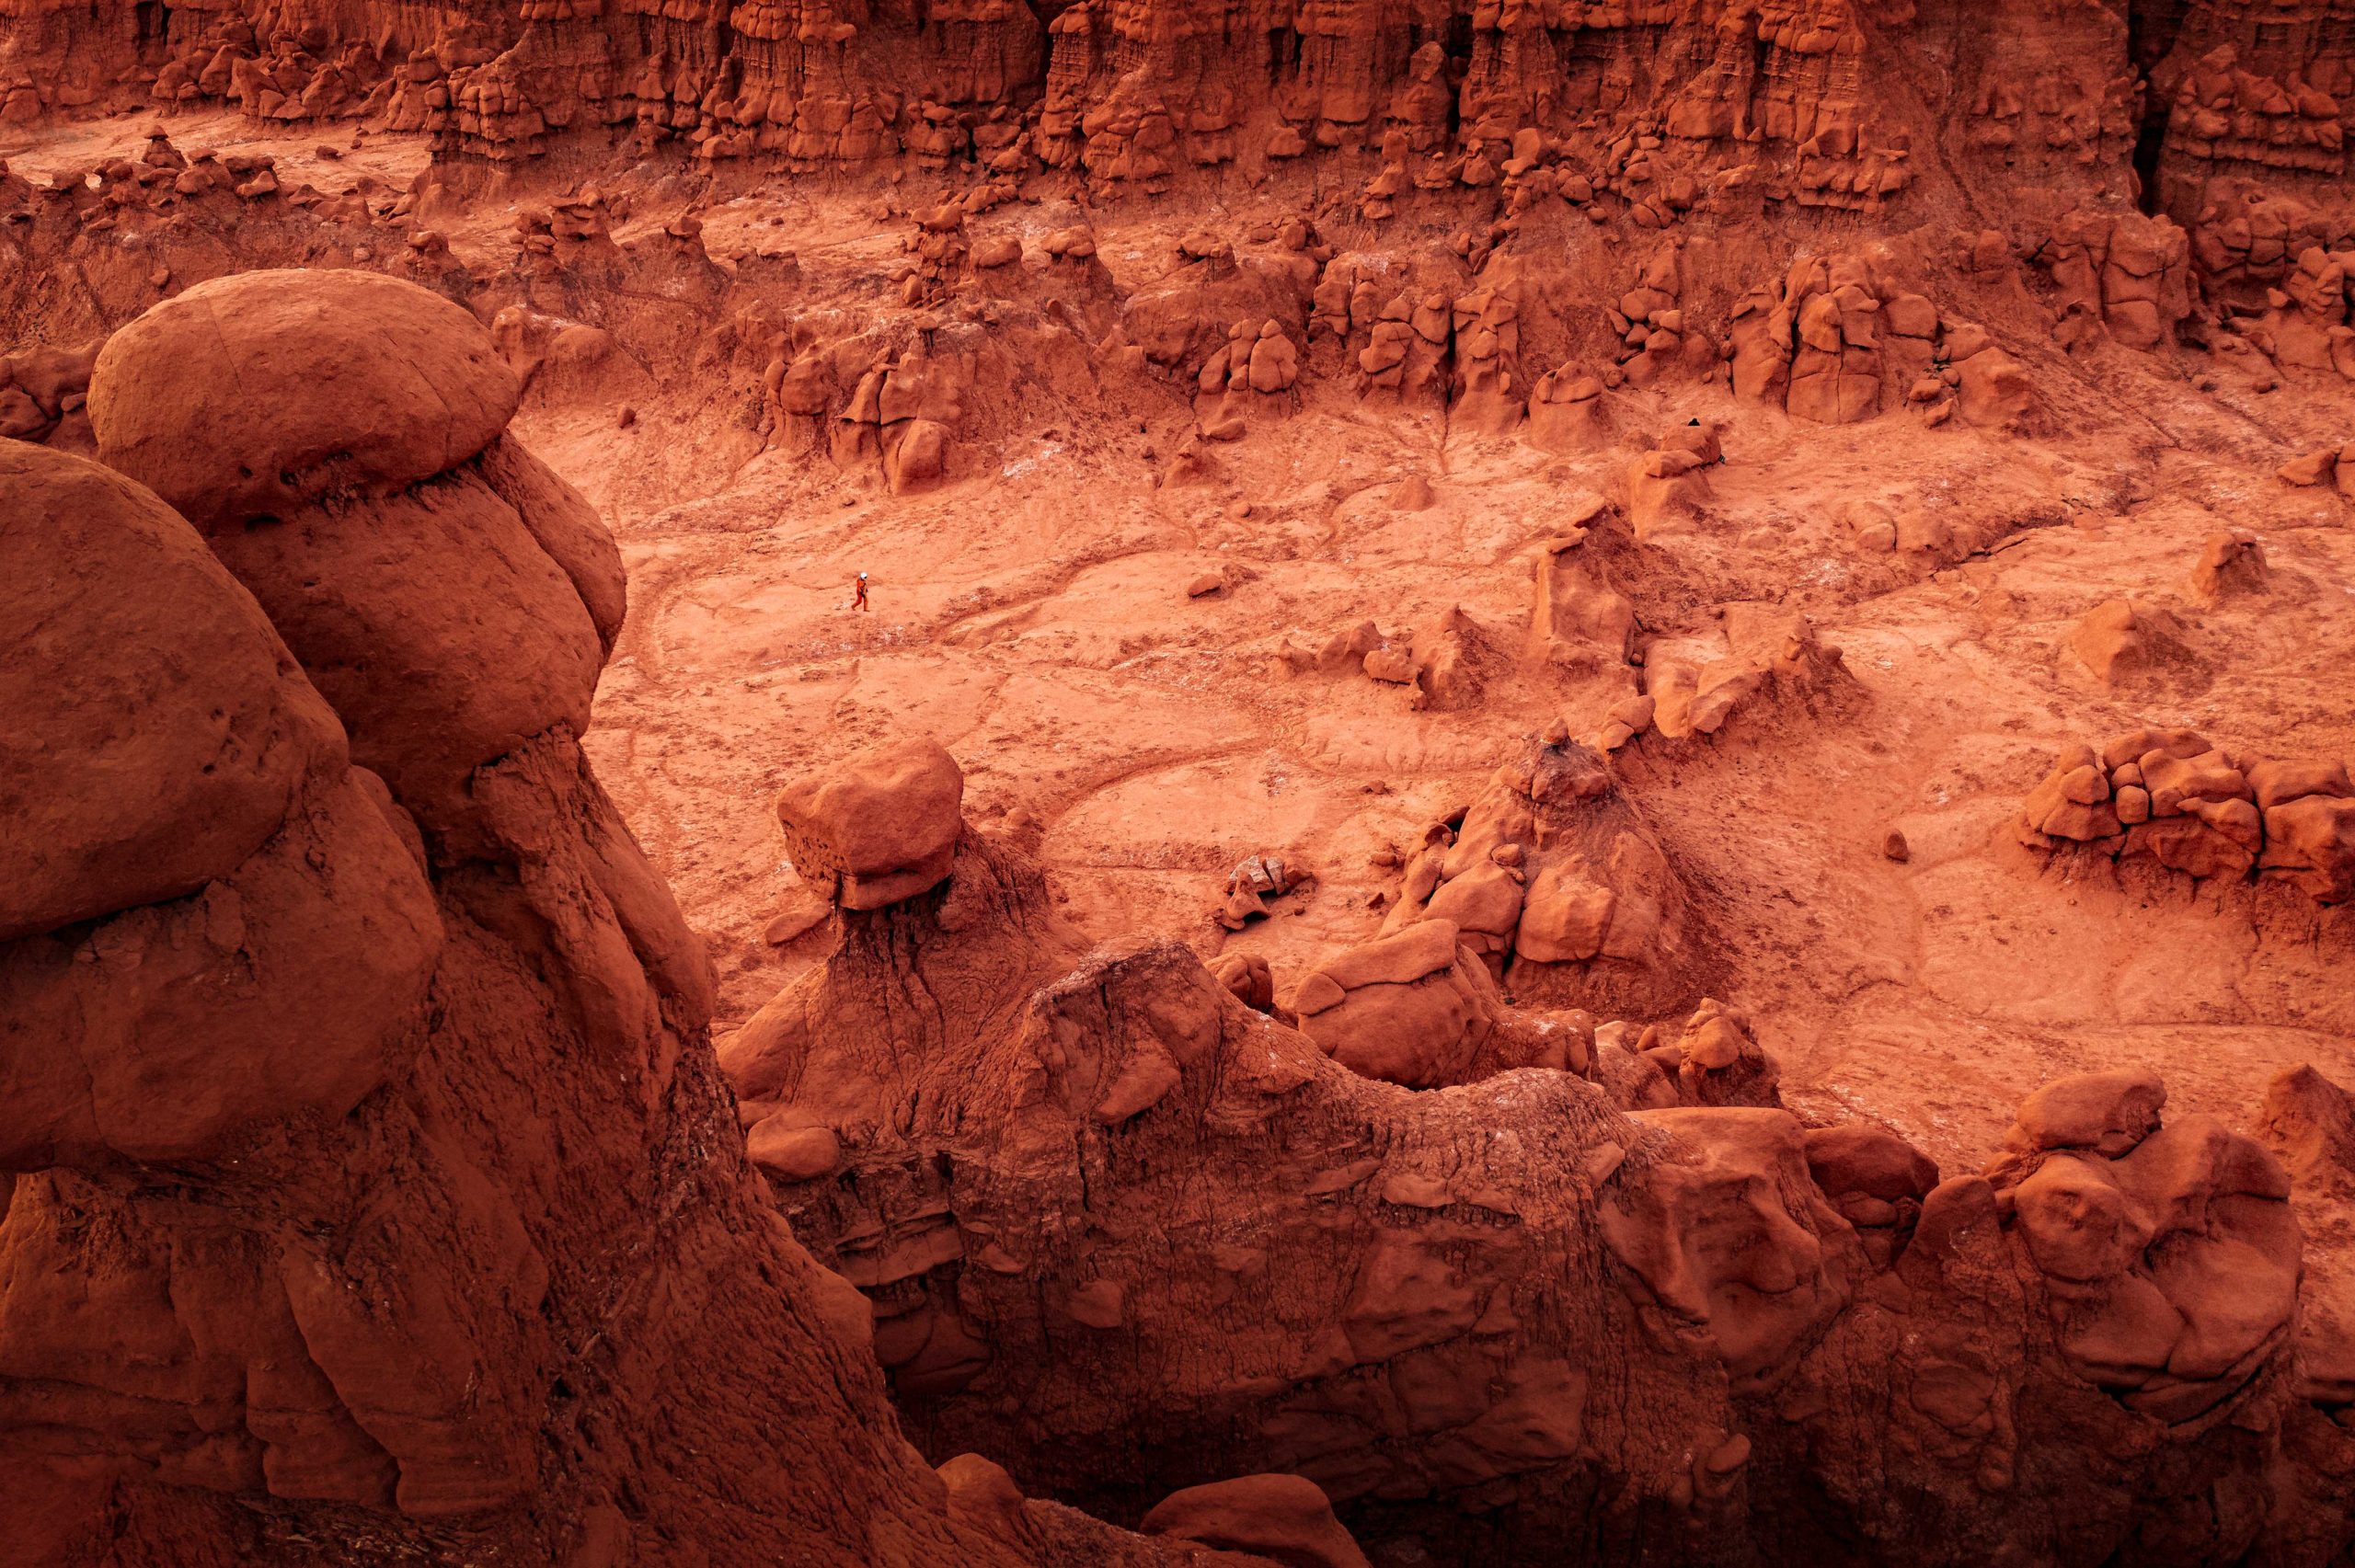 An astronaut explores the Mars-Like landscape of Goblin Valley, Utah